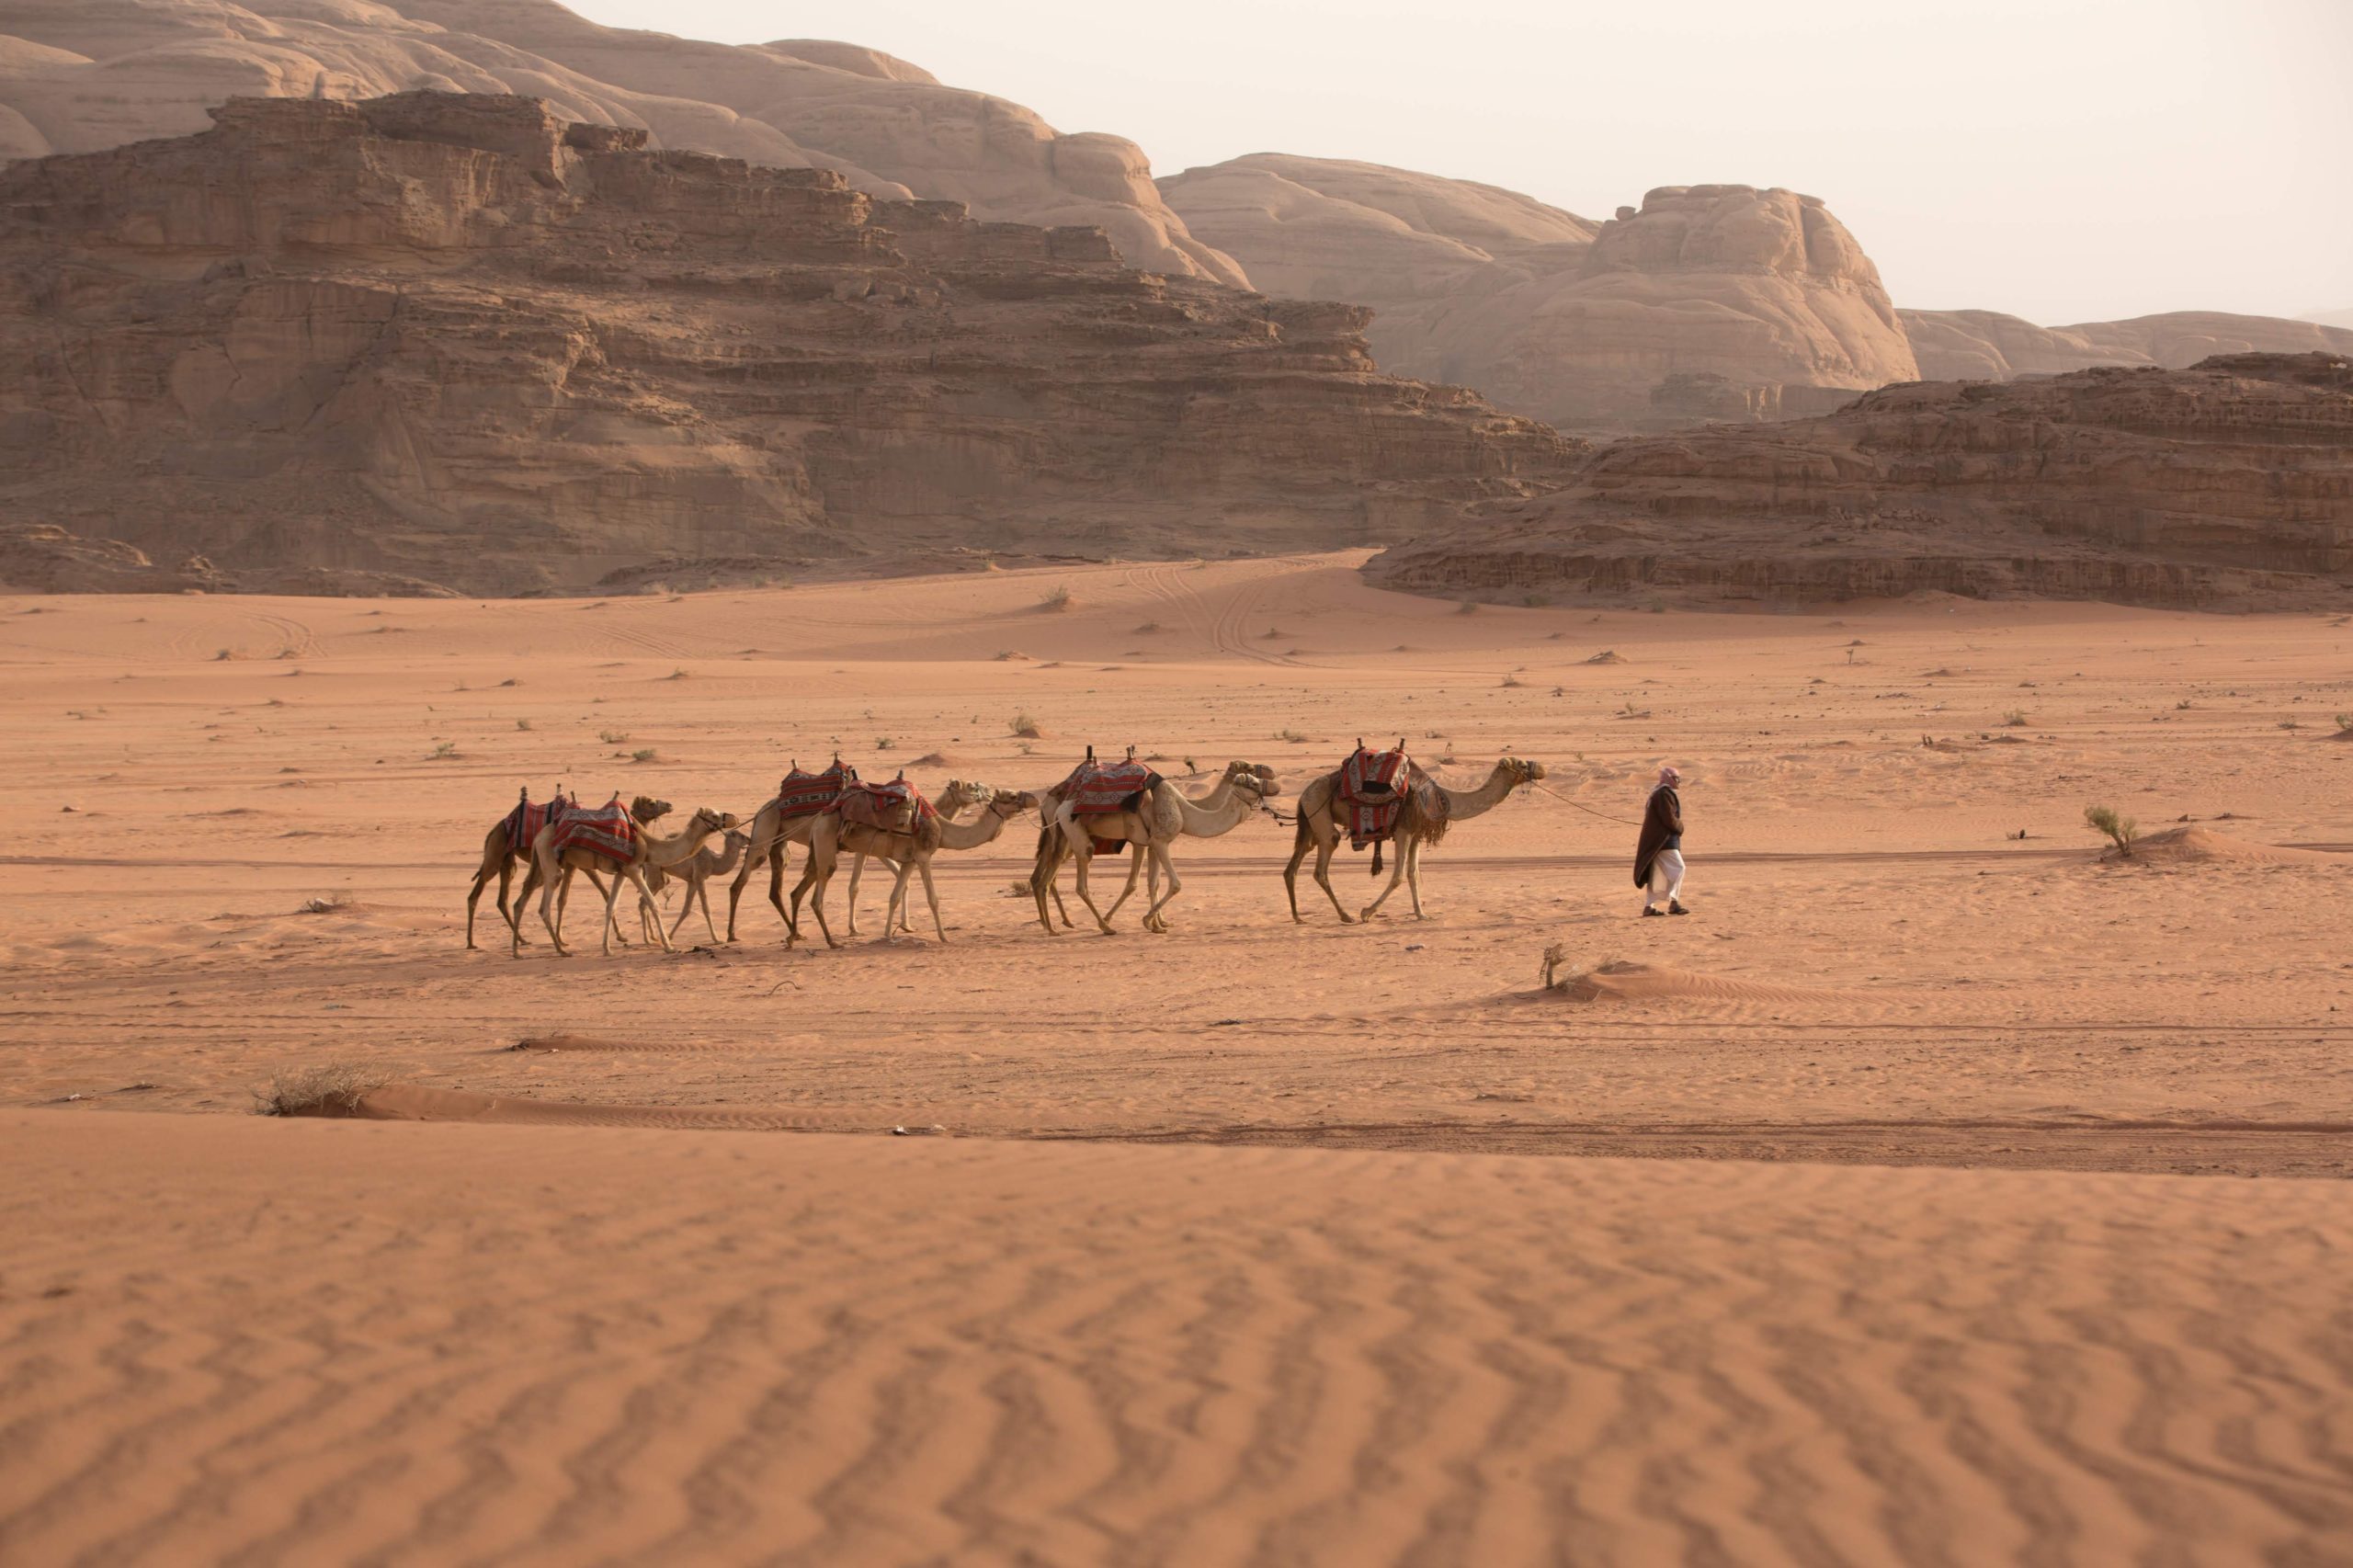 Enjoy A Authentic Bedouin Experience In Wadi Rum On The Highlights Of Jordan 4 Day Tour From Amman Or The Dead Sea